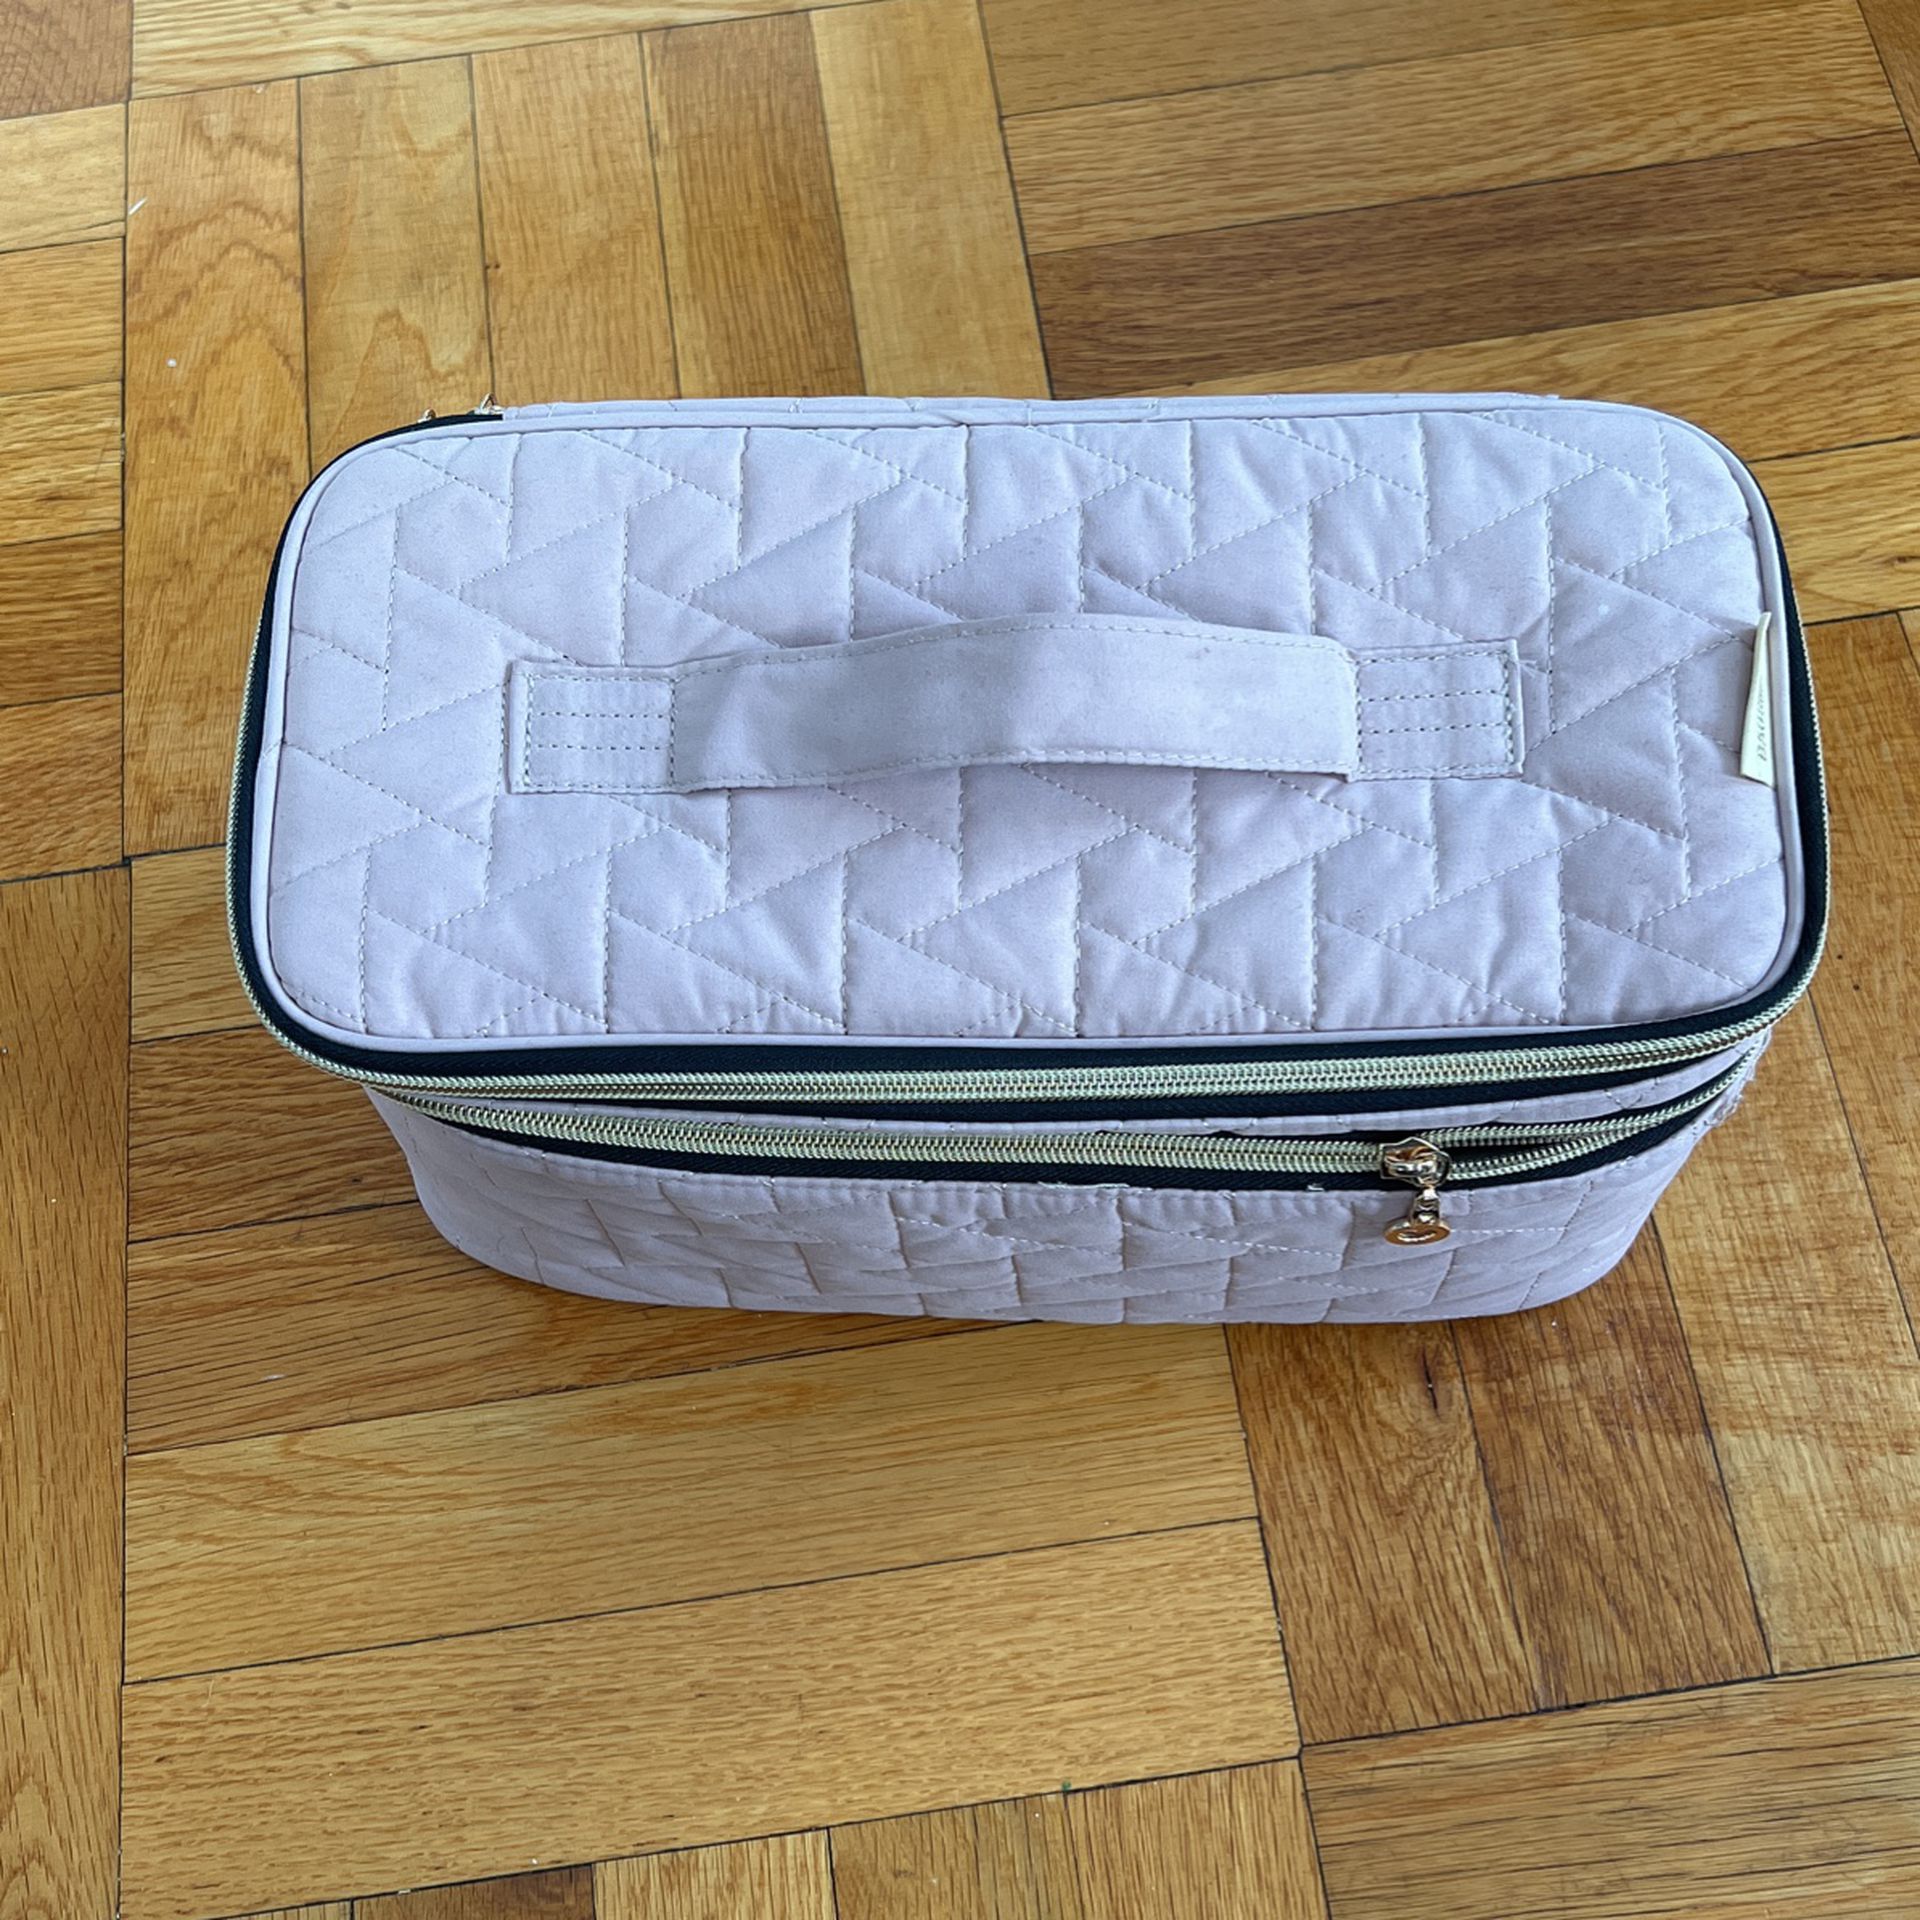 Designer Makeup Bag Travel Cosmetic Case for Sale in Brooklyn, NY - OfferUp